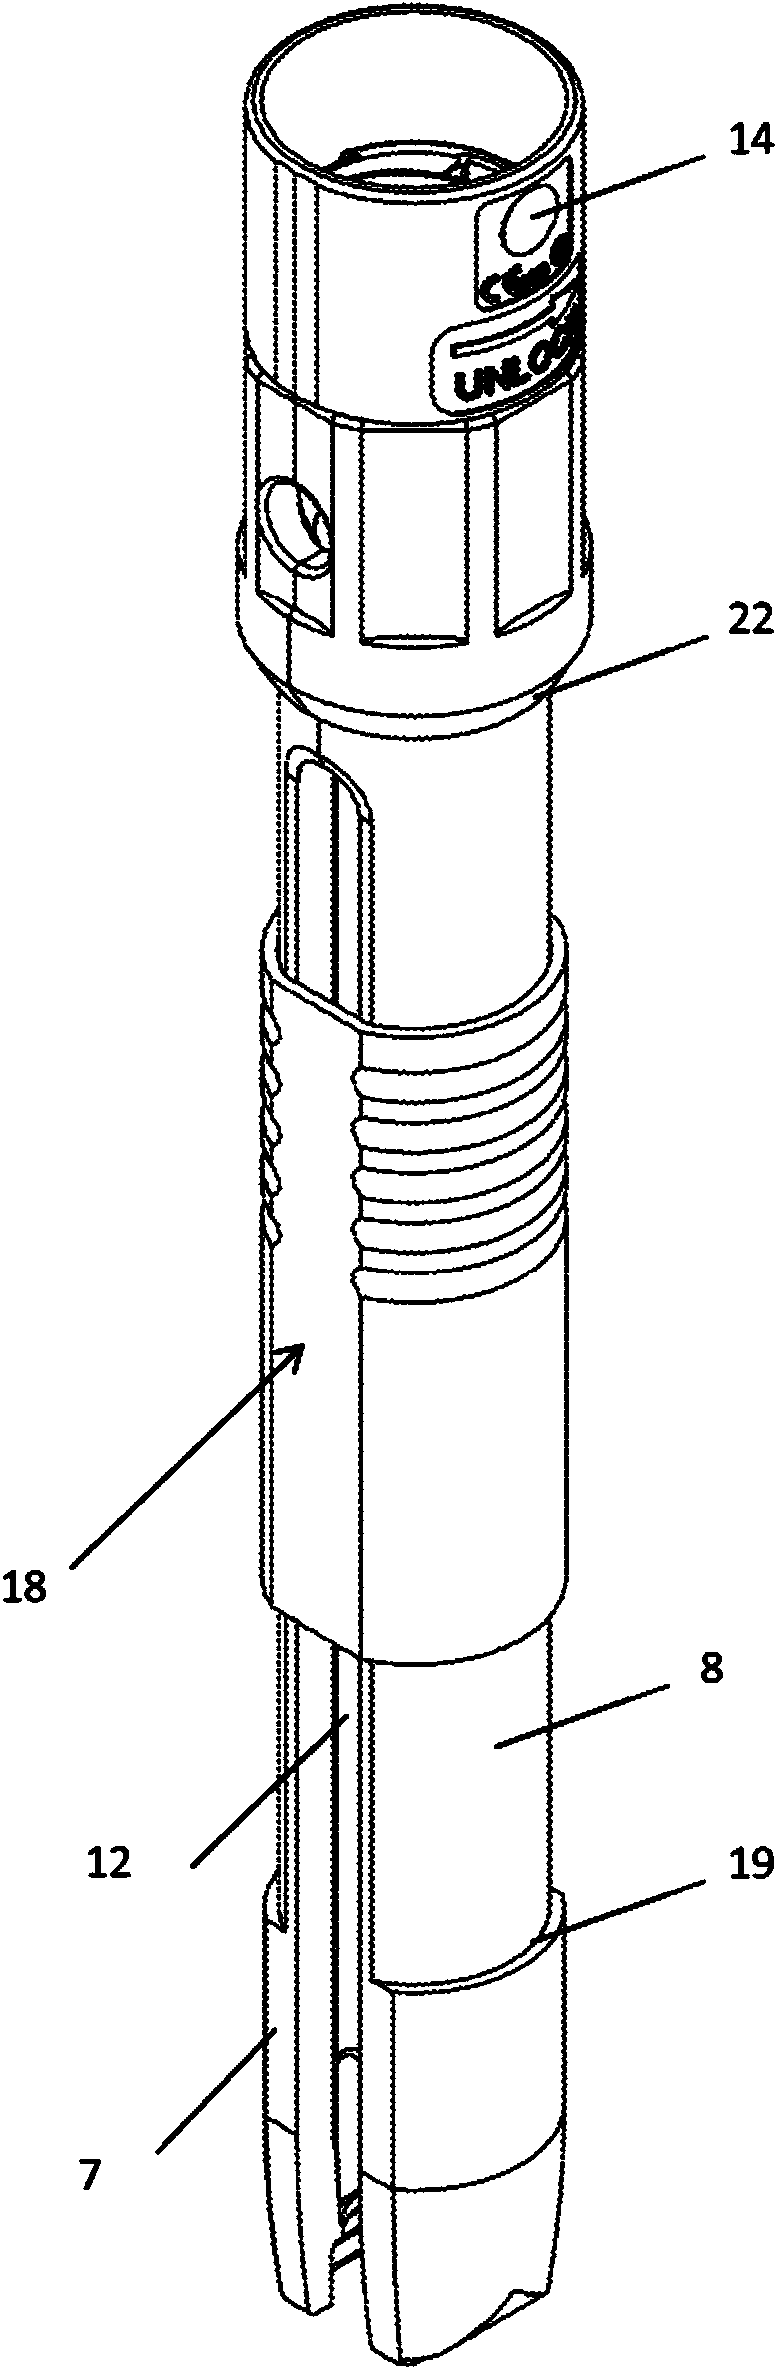 Surgical instrument and system for securing vertebrae